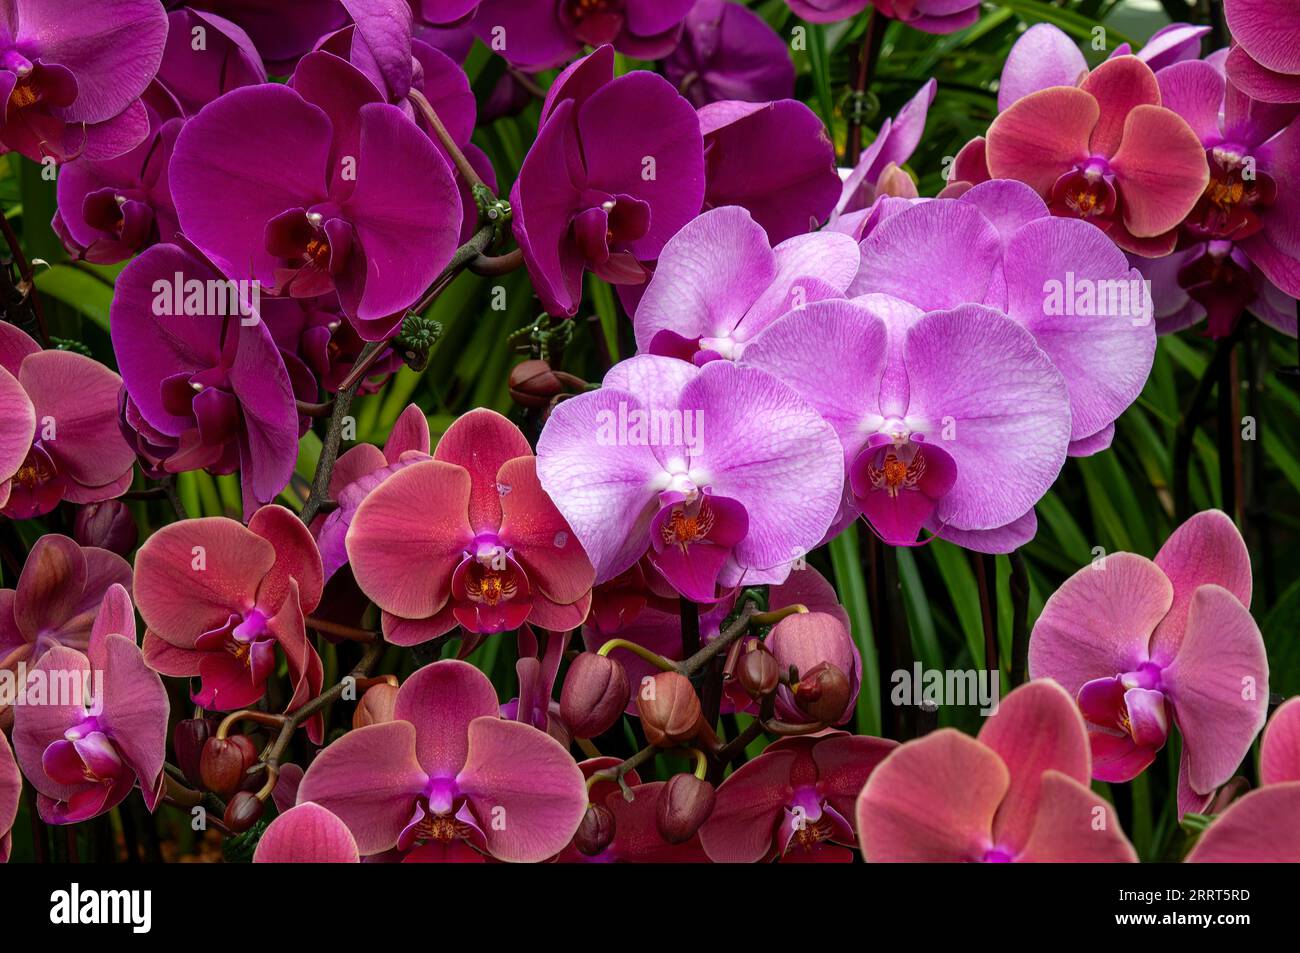 Sydney Australia, flowering pink and purple moth orchids Stock Photo